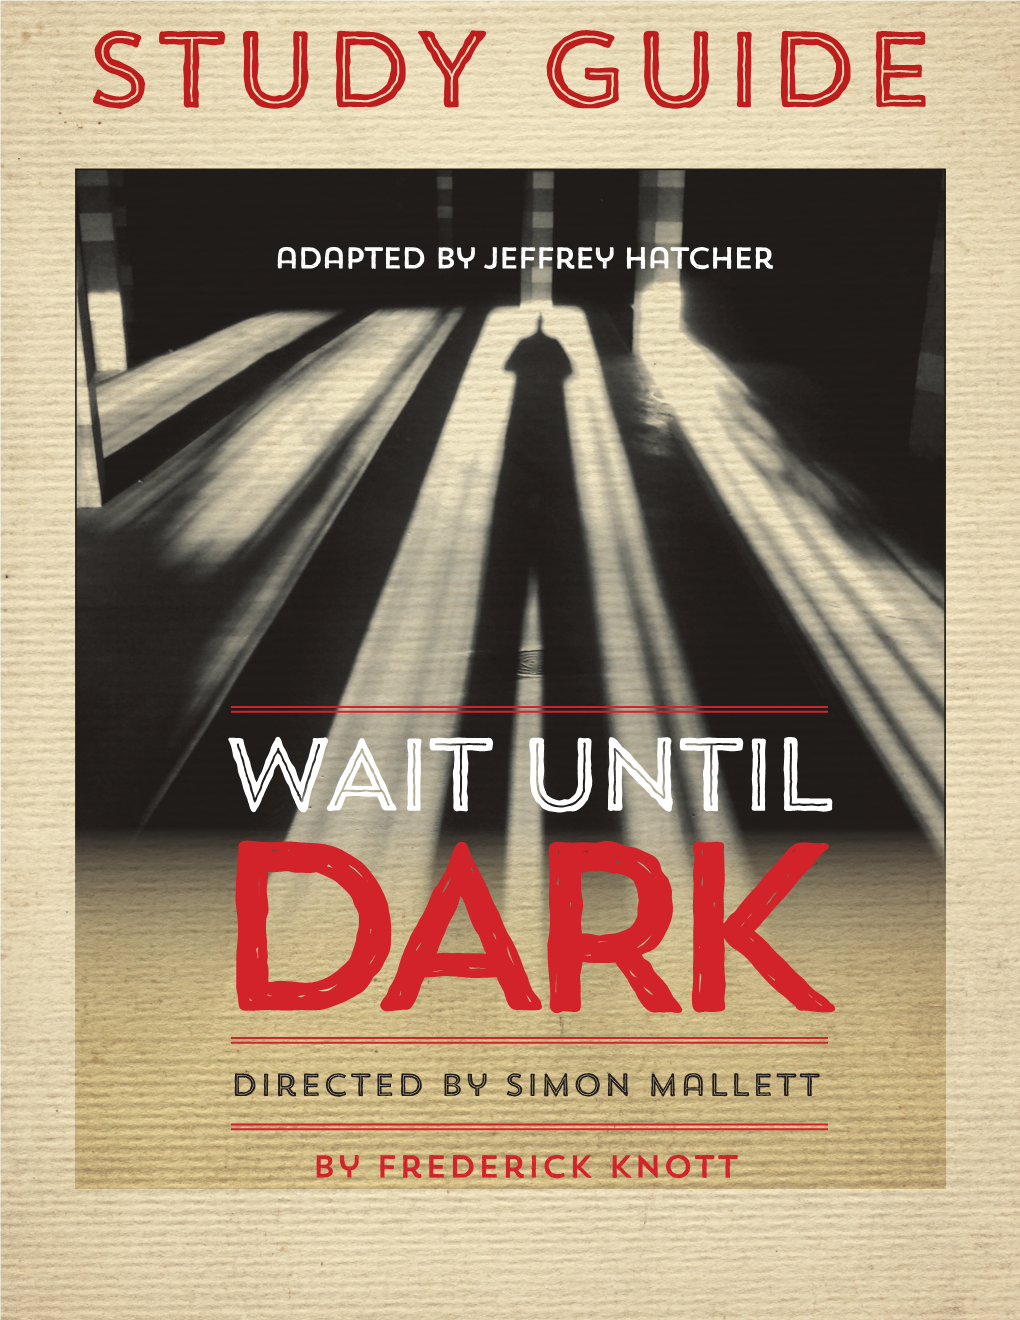 We Talk to Actress Anna Cummer About What Makes WAIT UNTIL DARK So Thrilling, Playing a Character Who Is Blind, and the Best Acting Advice She Ever Received